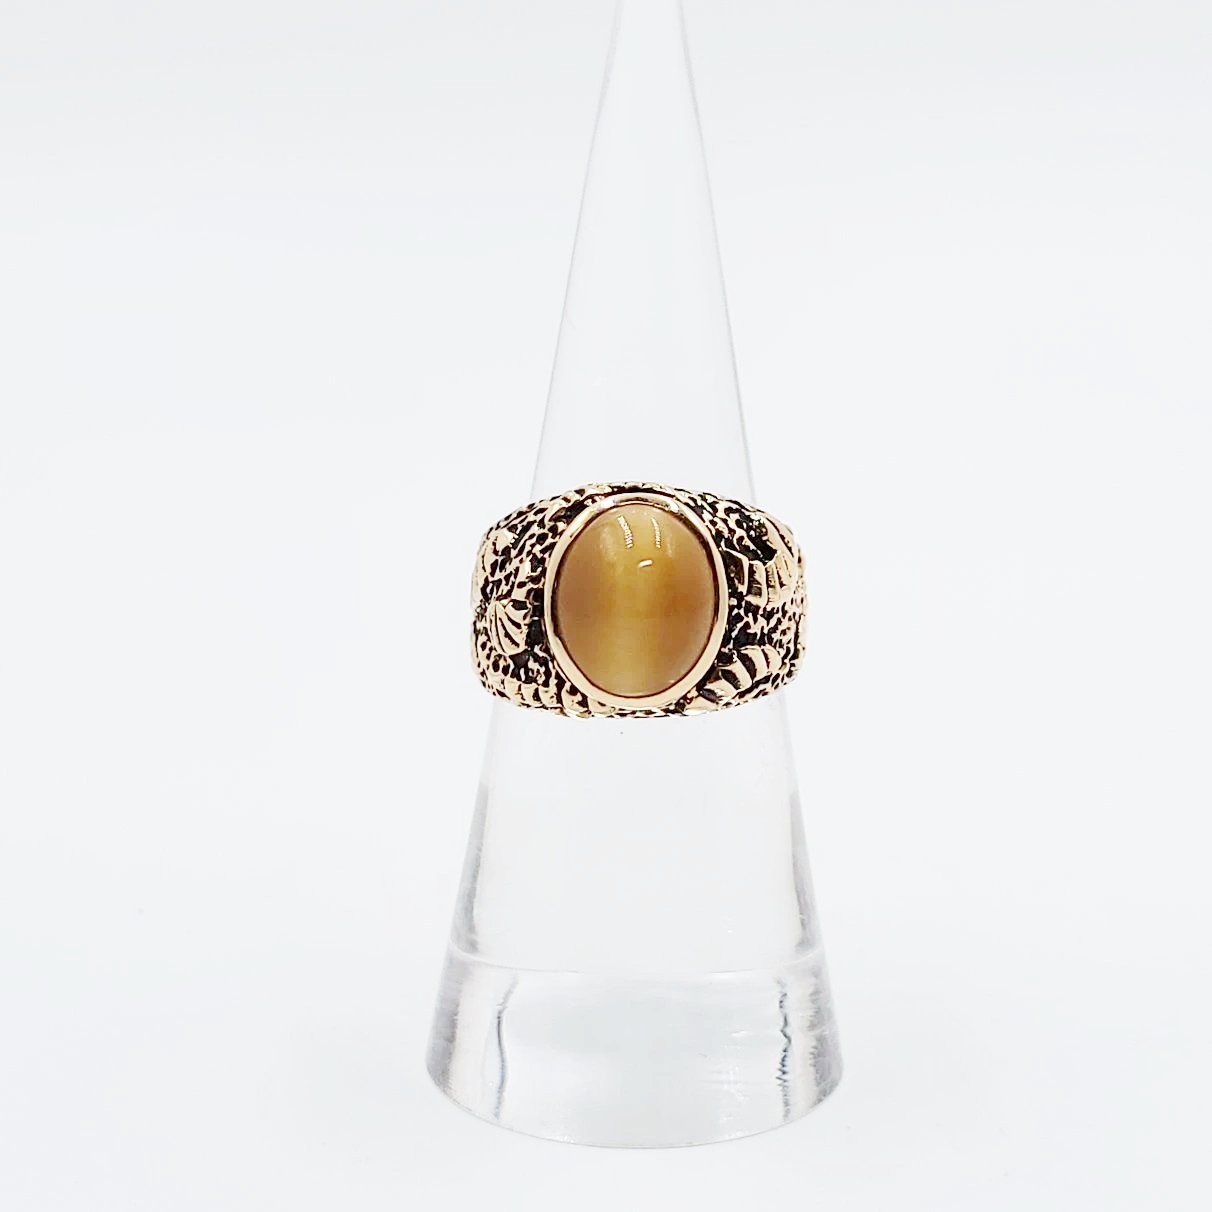 Chrysoberyl Cats Eye Ring 14kt Gold Leaf Nugget Ring - Elevated Metaphysical